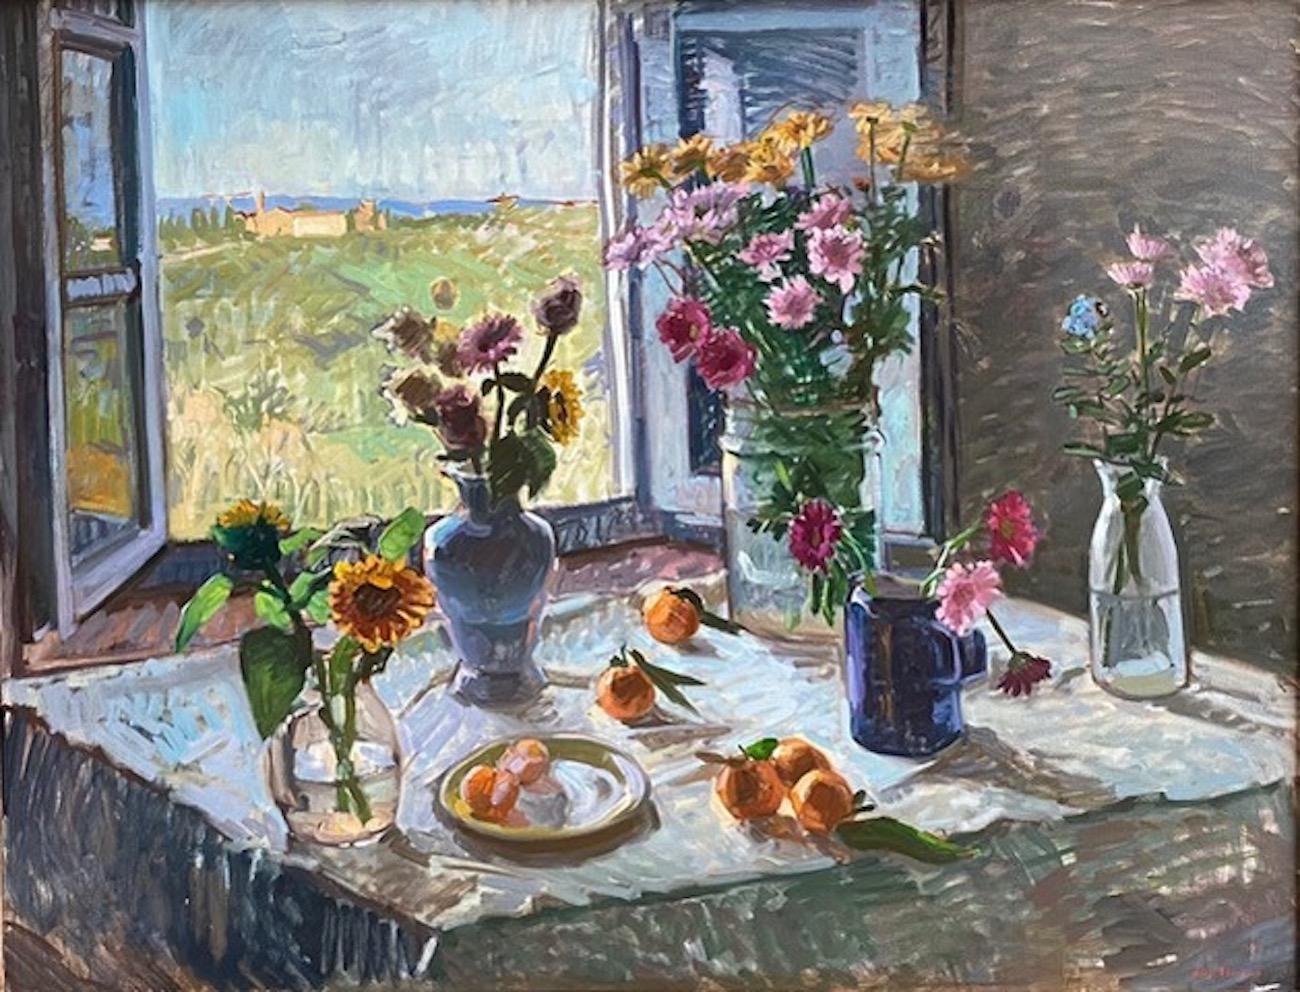 "Looking Towards Bonazza" contemporary bright still life with Tuscan Landscape